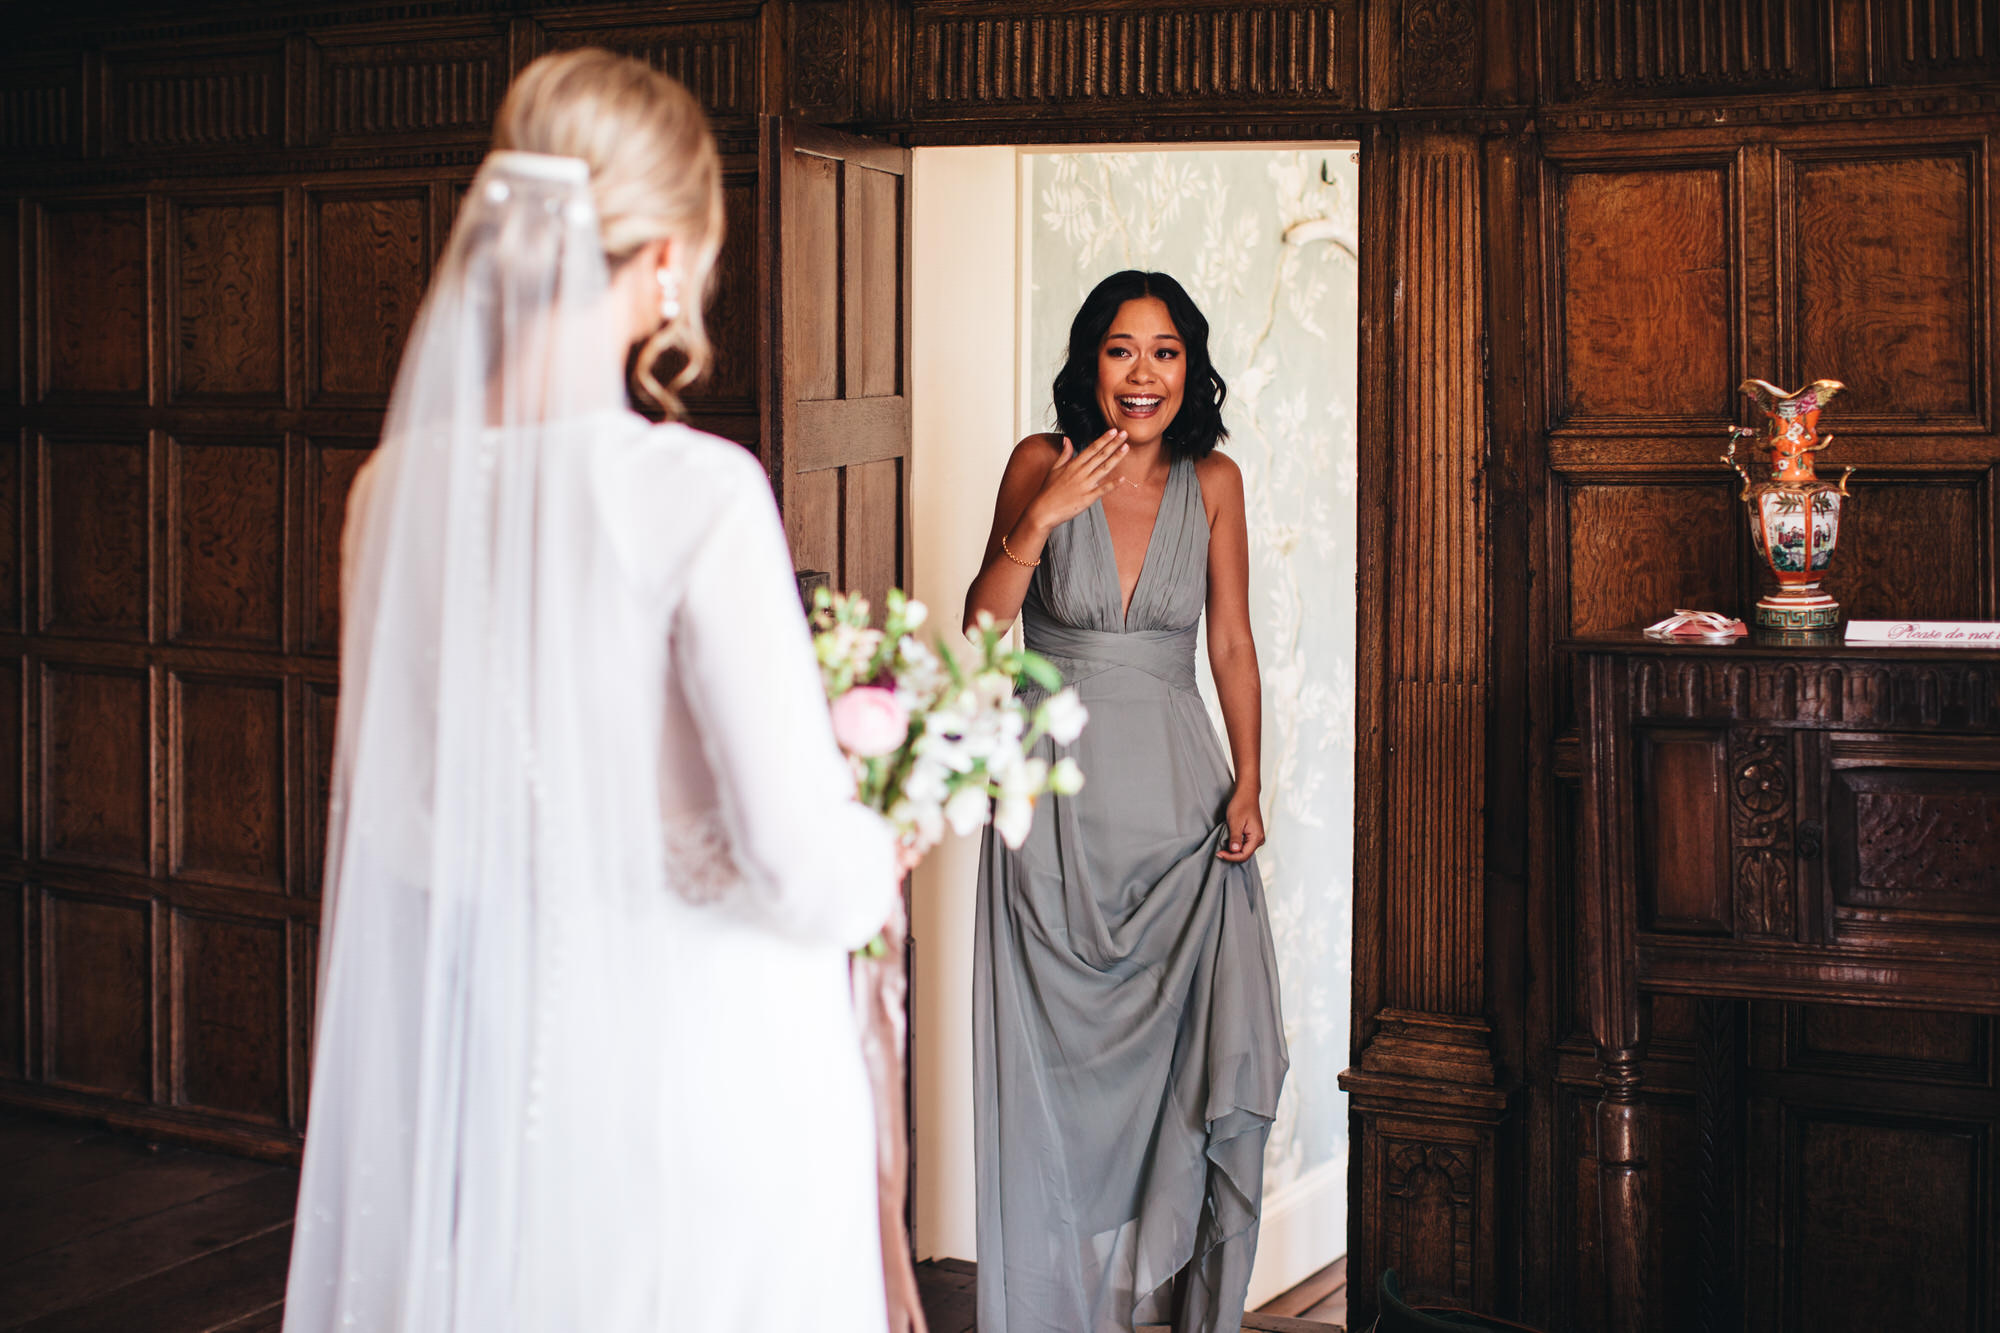 bridesmaid gets emotional seeing bride all ready